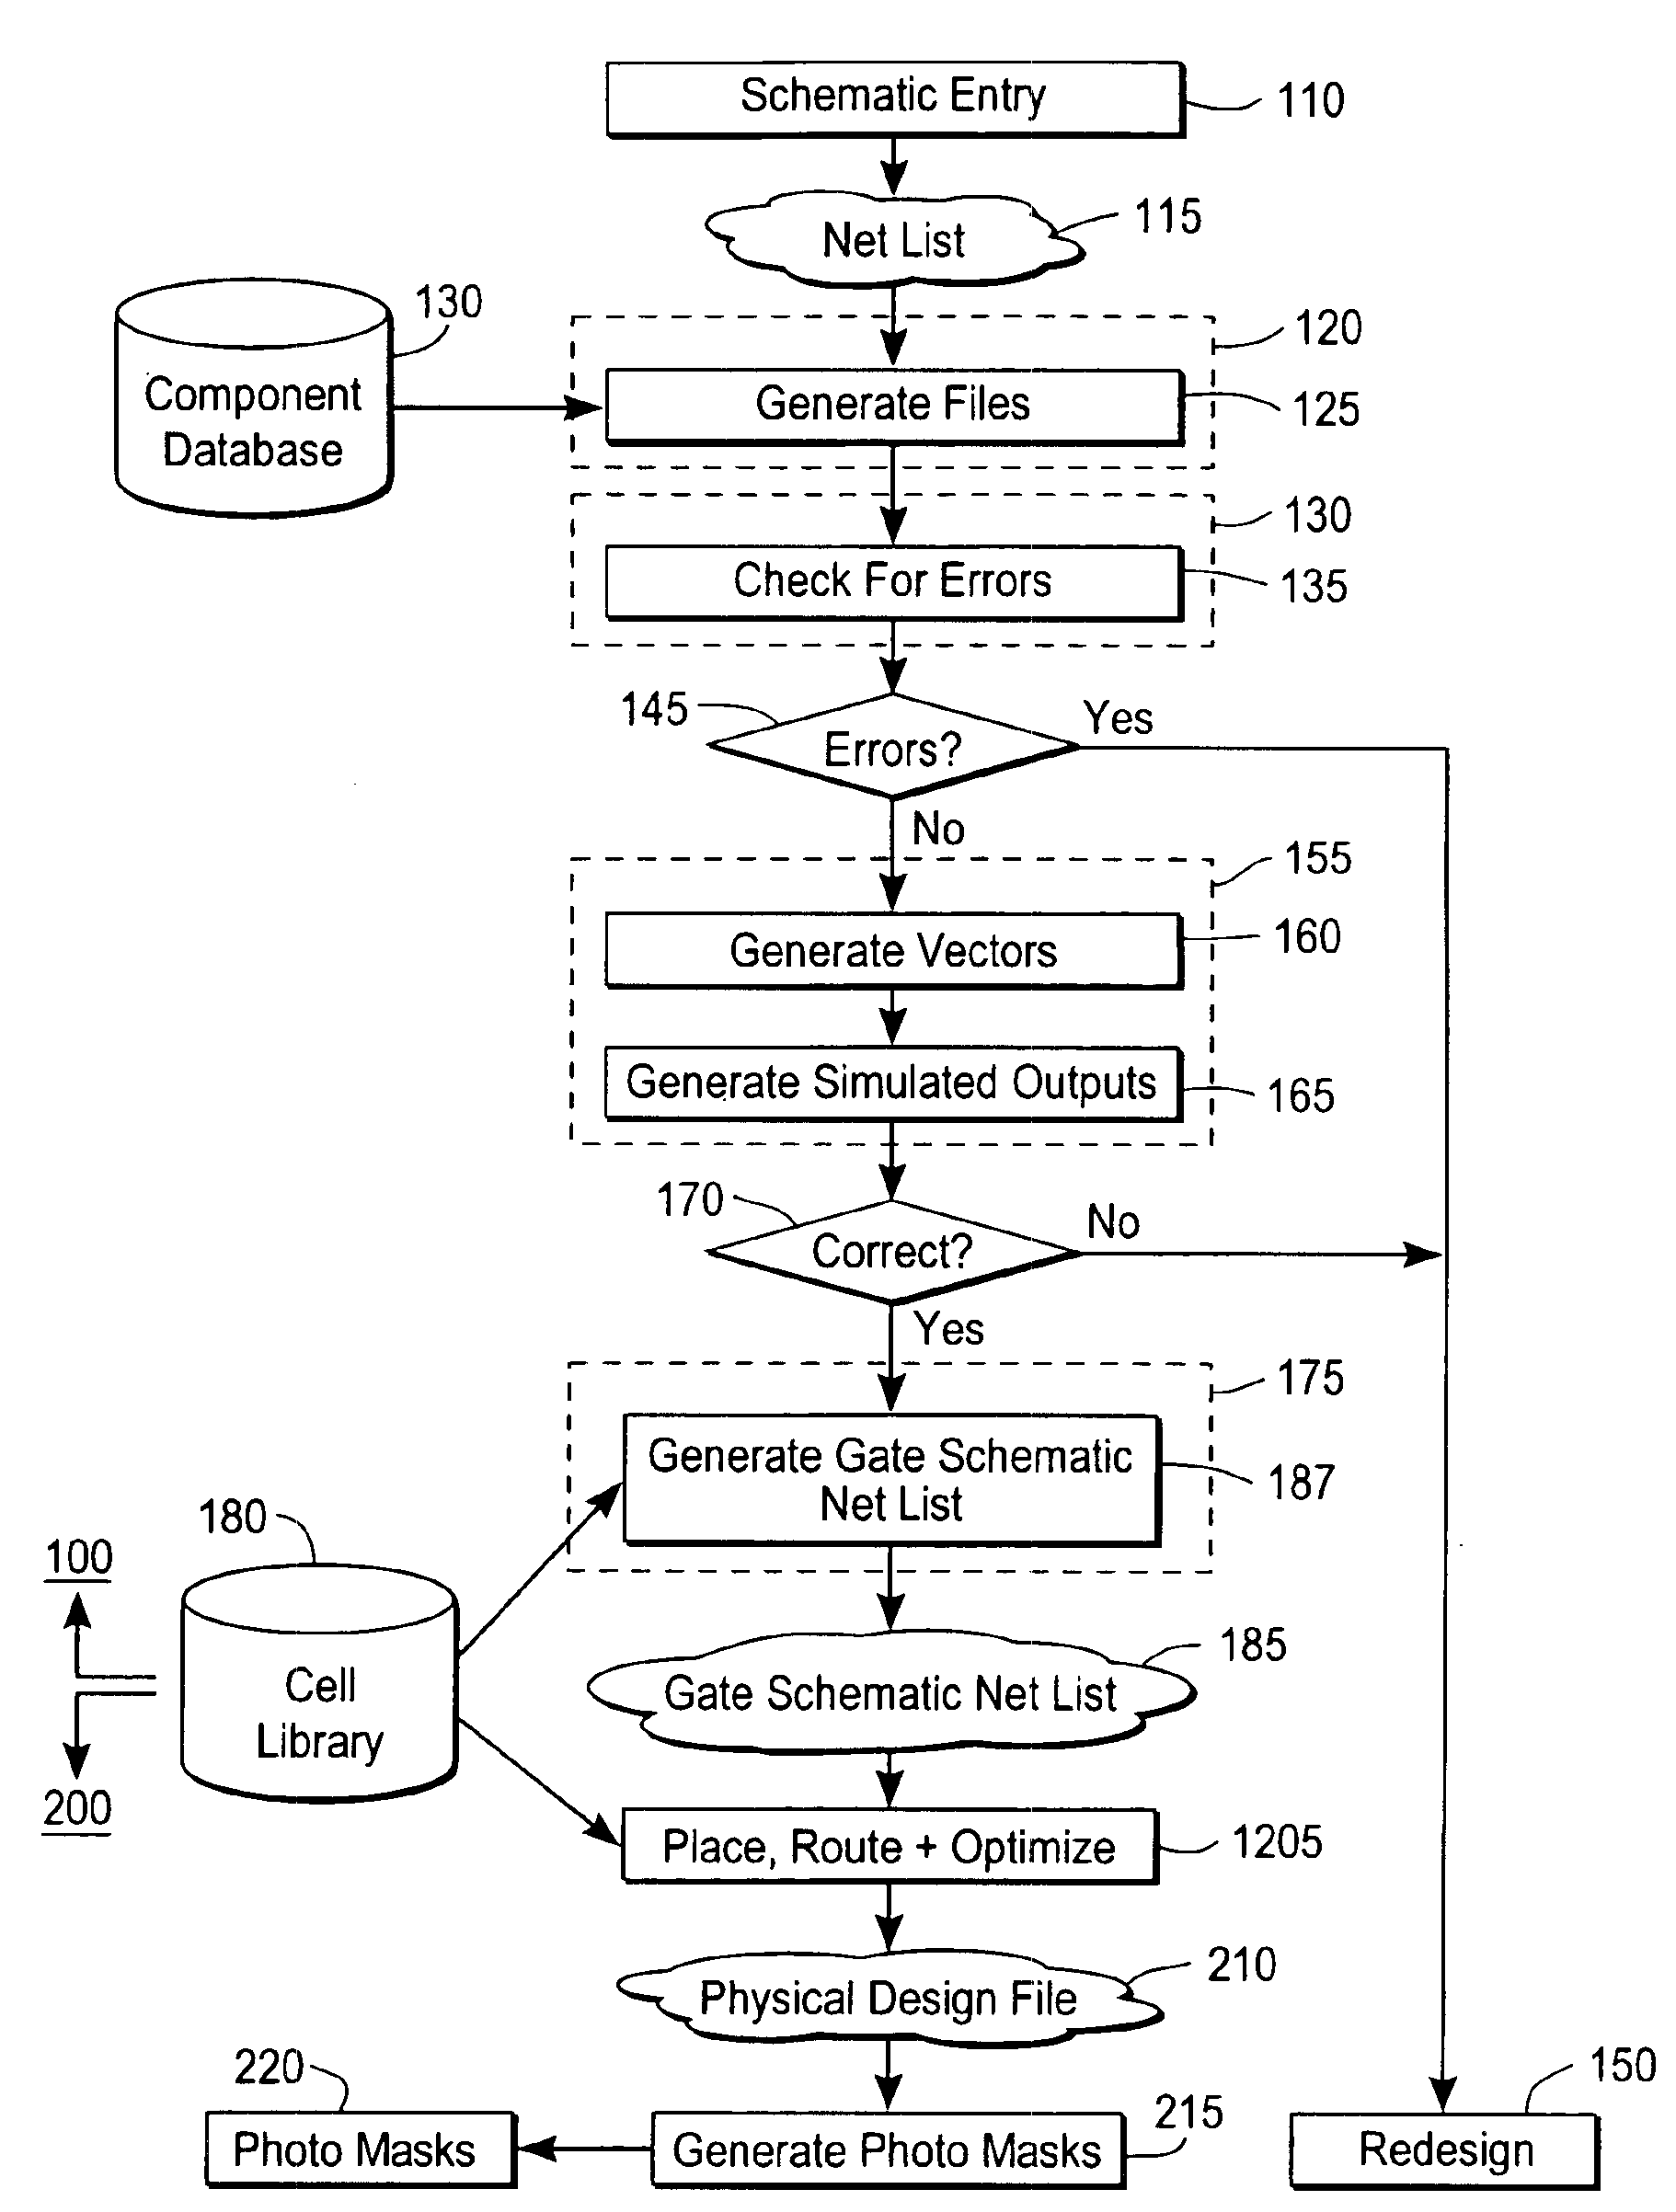 Method for rapid estimation of wire delays and capacitances based on placement of cells